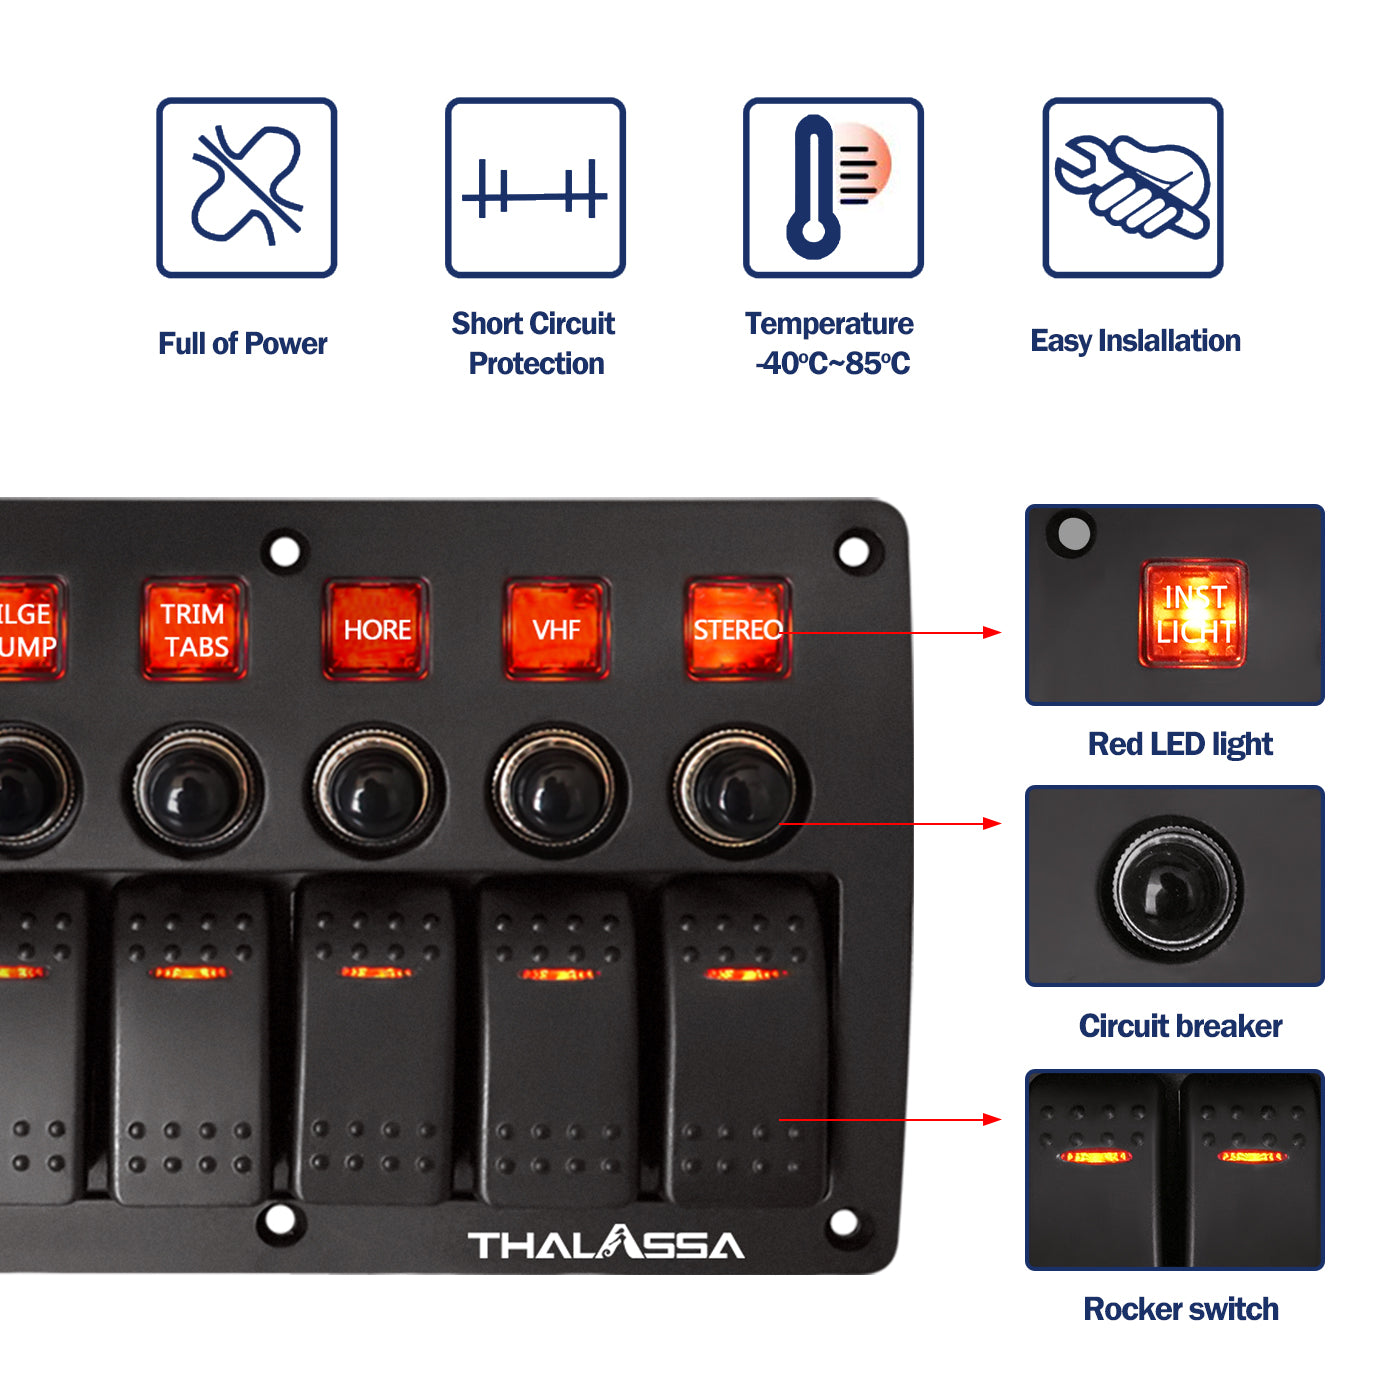 GenuineMarine-THALASSA 4/8 Gang Pre Wired Rocker Switch Panel - Waterproof On/Off Toggle Rocker, 12V 24V with Fuse, Circuit Breaker with 3 Pin Red LED Indicator for RV, Cars, Marine, Boat - THALASSA